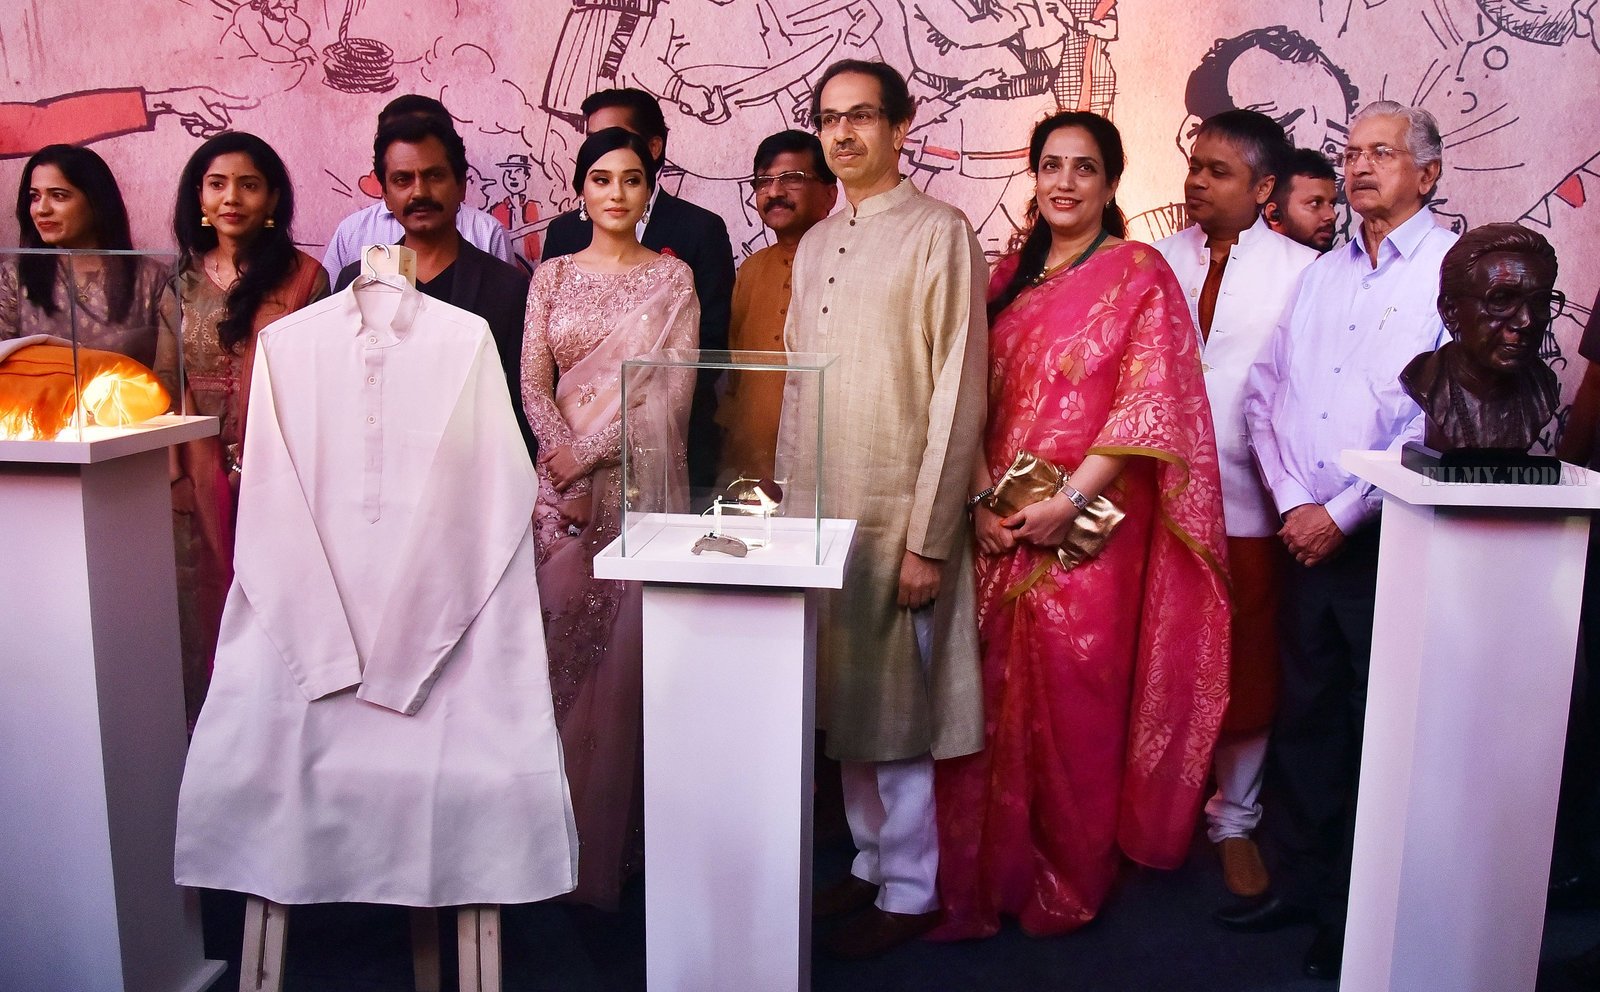 Photos: Thackeray Film Trailer Launch | Picture 1618463